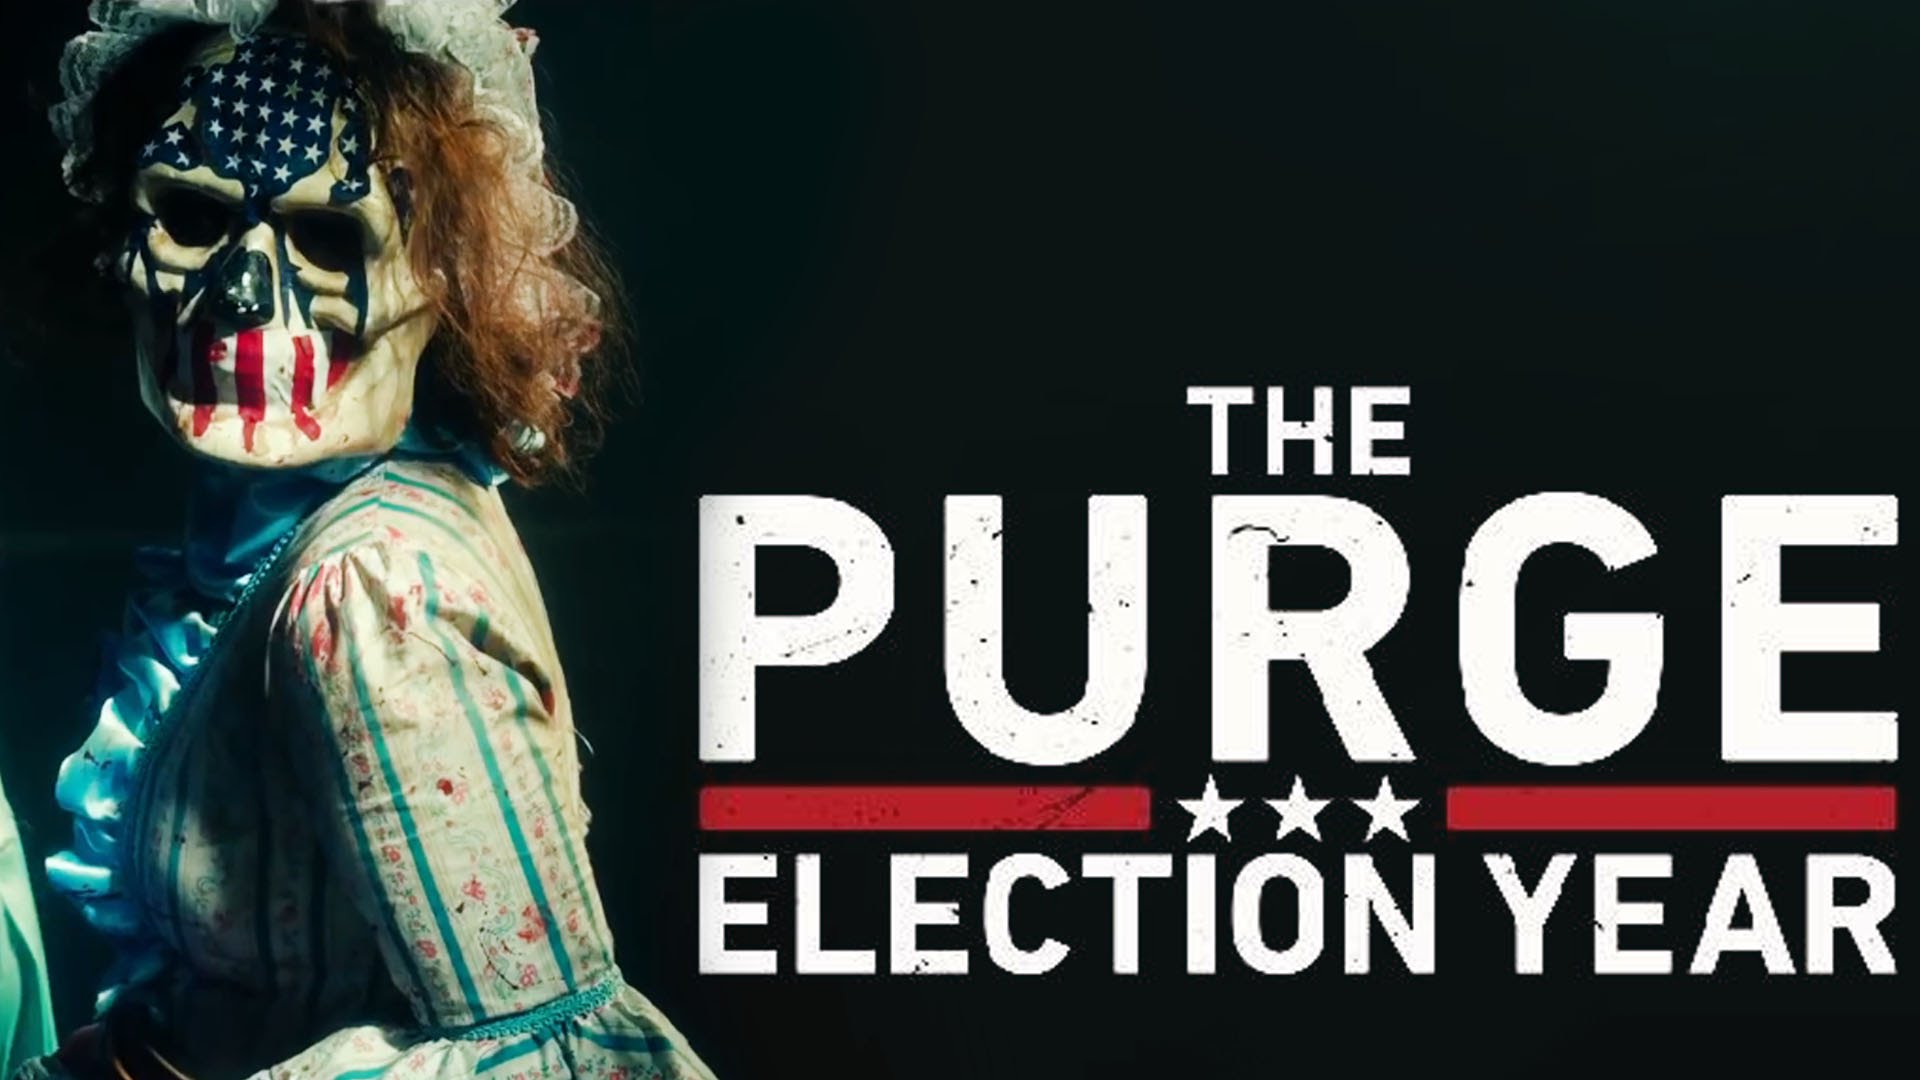 The purge featured